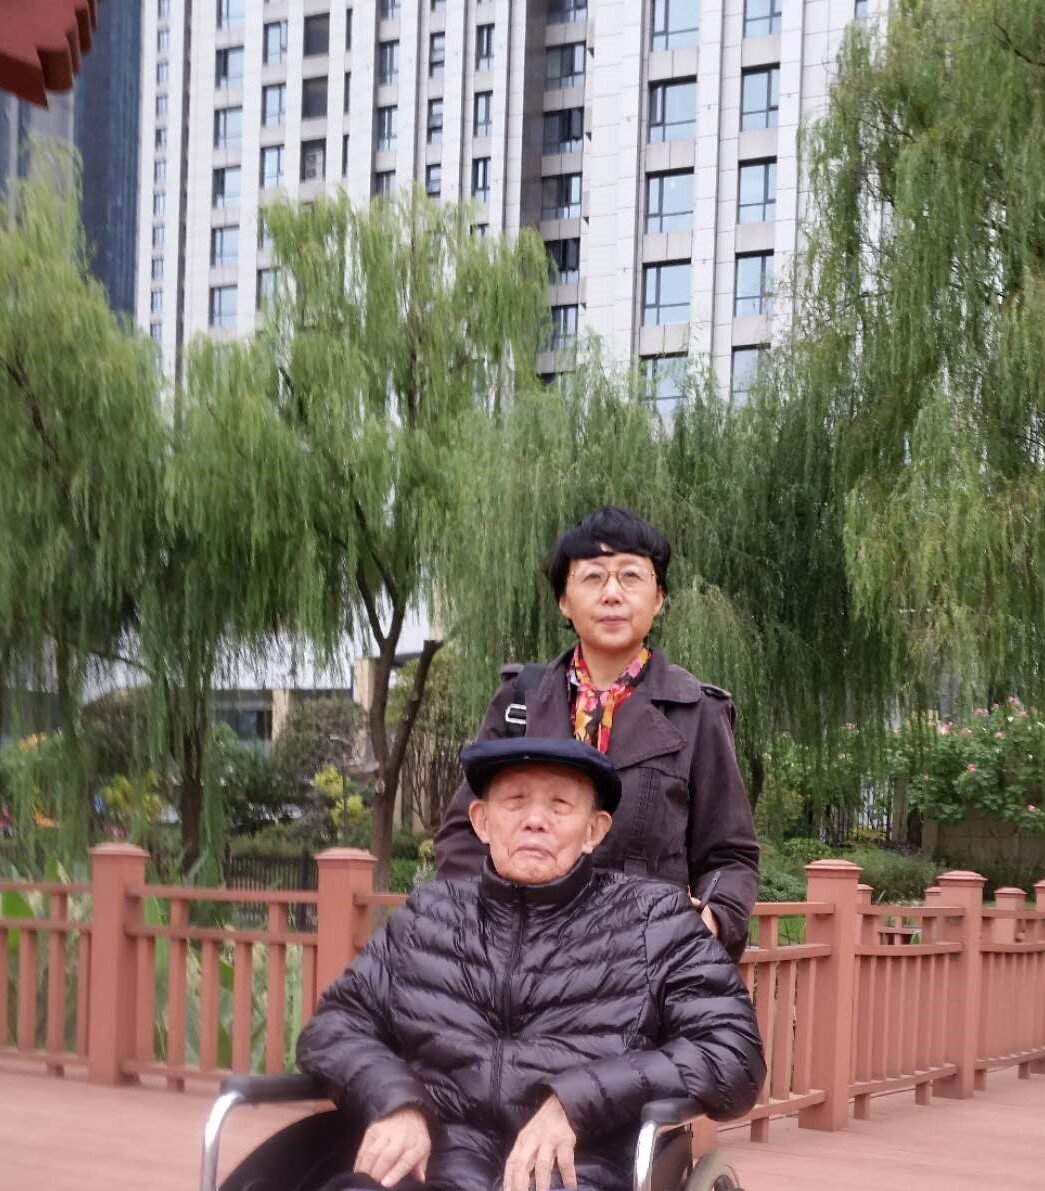 Featured image: Sister Dong Hong Marie Zhang with her father. Her family has struggled in an anti-Christian culture. (Photo courtesy of Sister Dong Hong Marie Zhang)